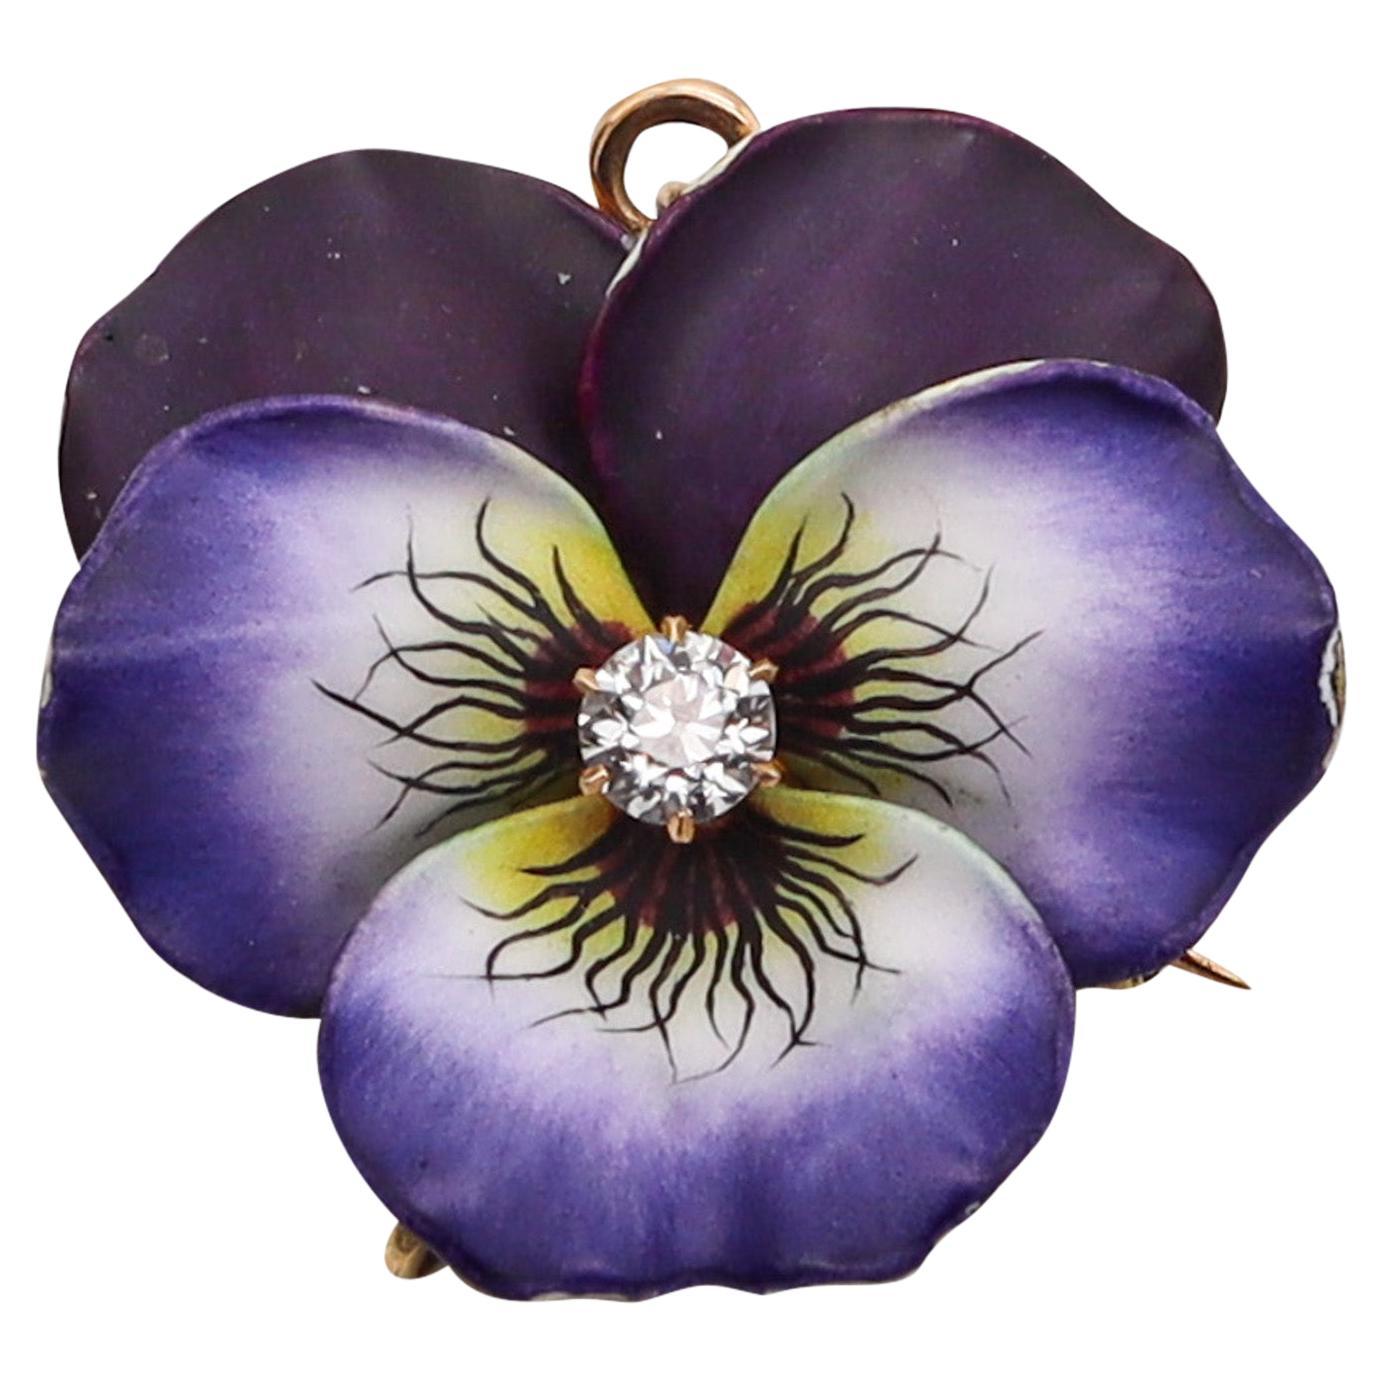 Hedges & Co. 1900 Enameled Pansy Pendant Brooch In 14Kt Gold With Diamond